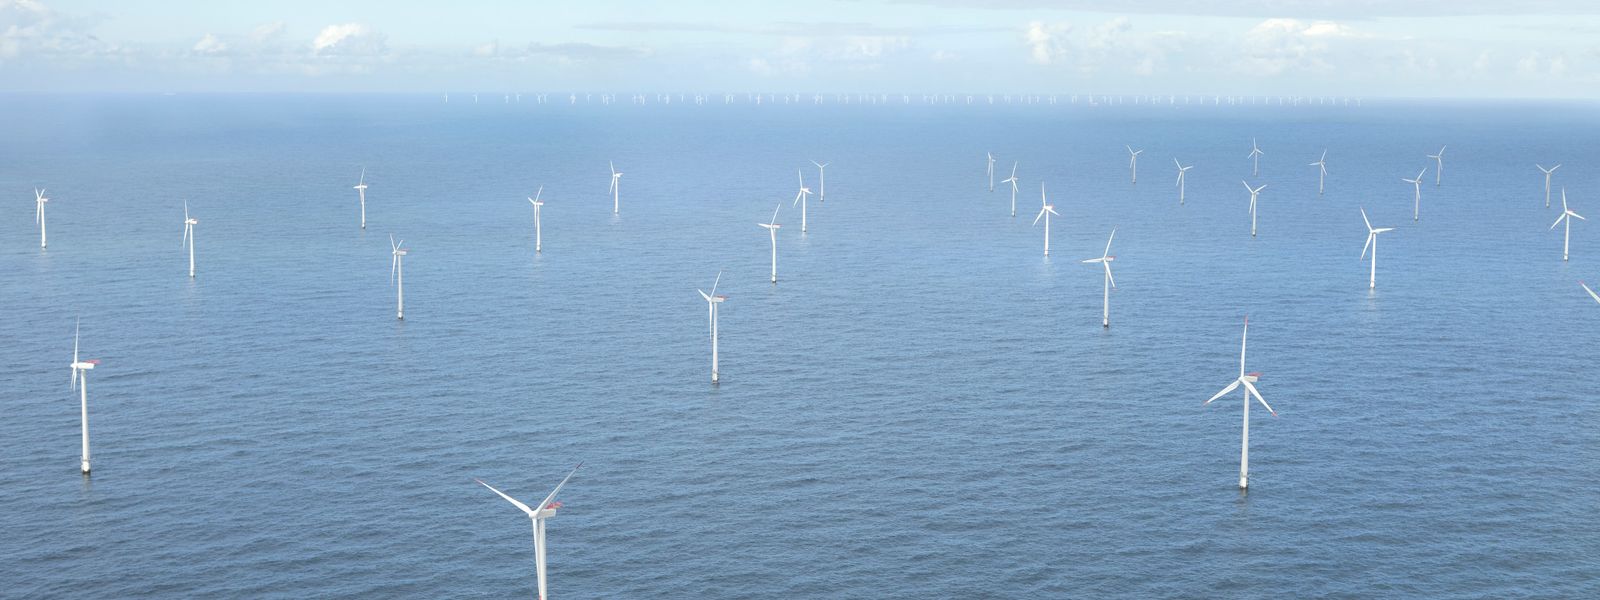 Dolwin 1 offshore windfarm